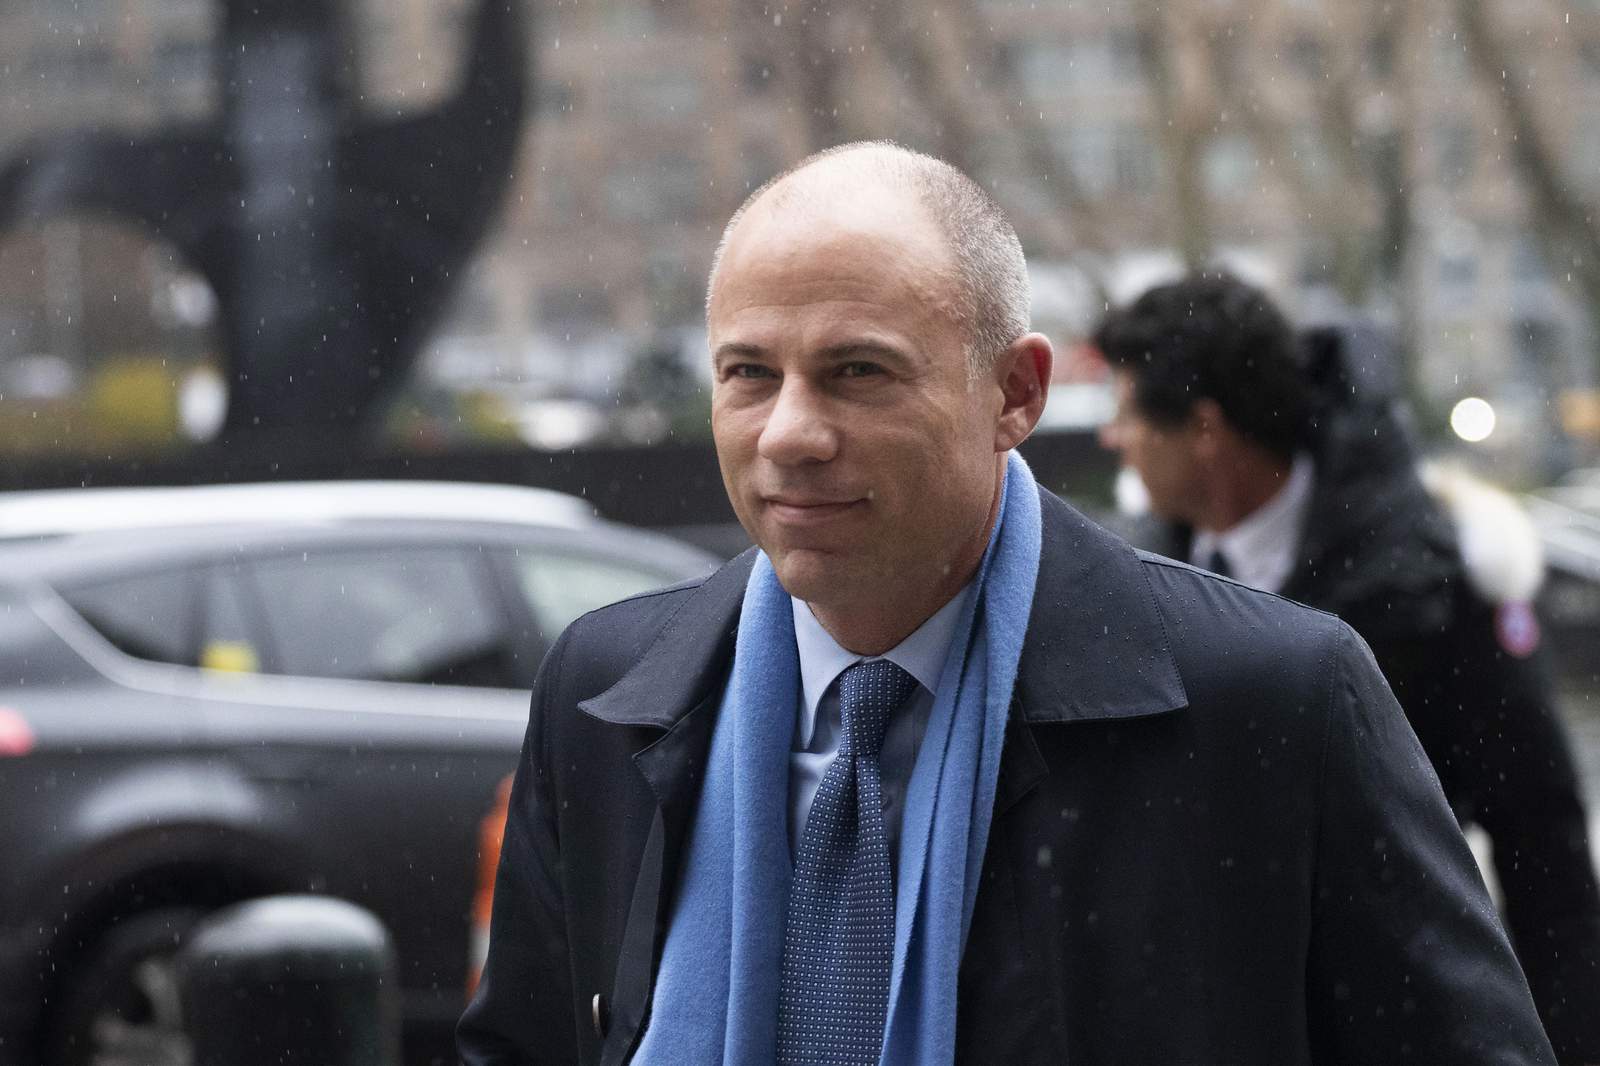 Avenatti's request to limit his testimony rejected by judge